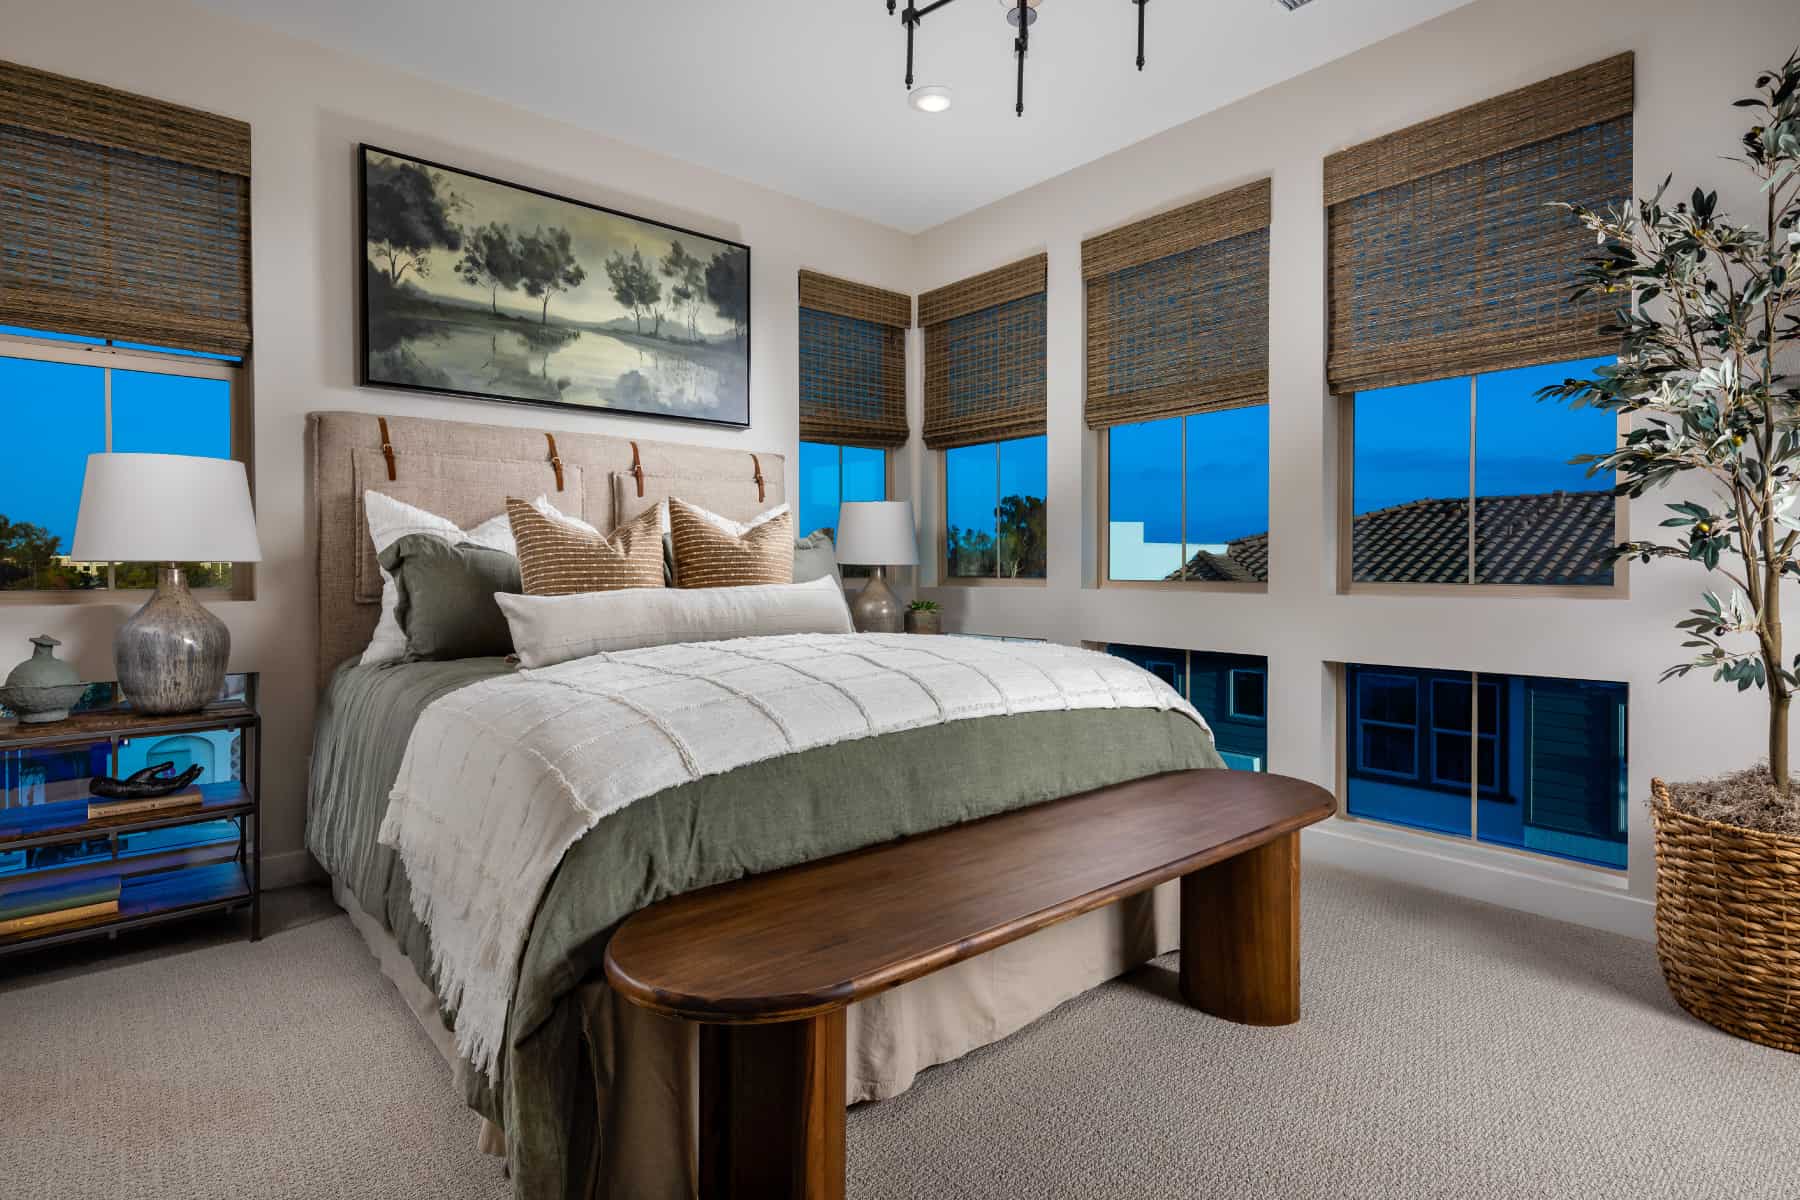 Primary Bedroom at Plan 7 of Belmont by Melia Homes in Cypress, CA